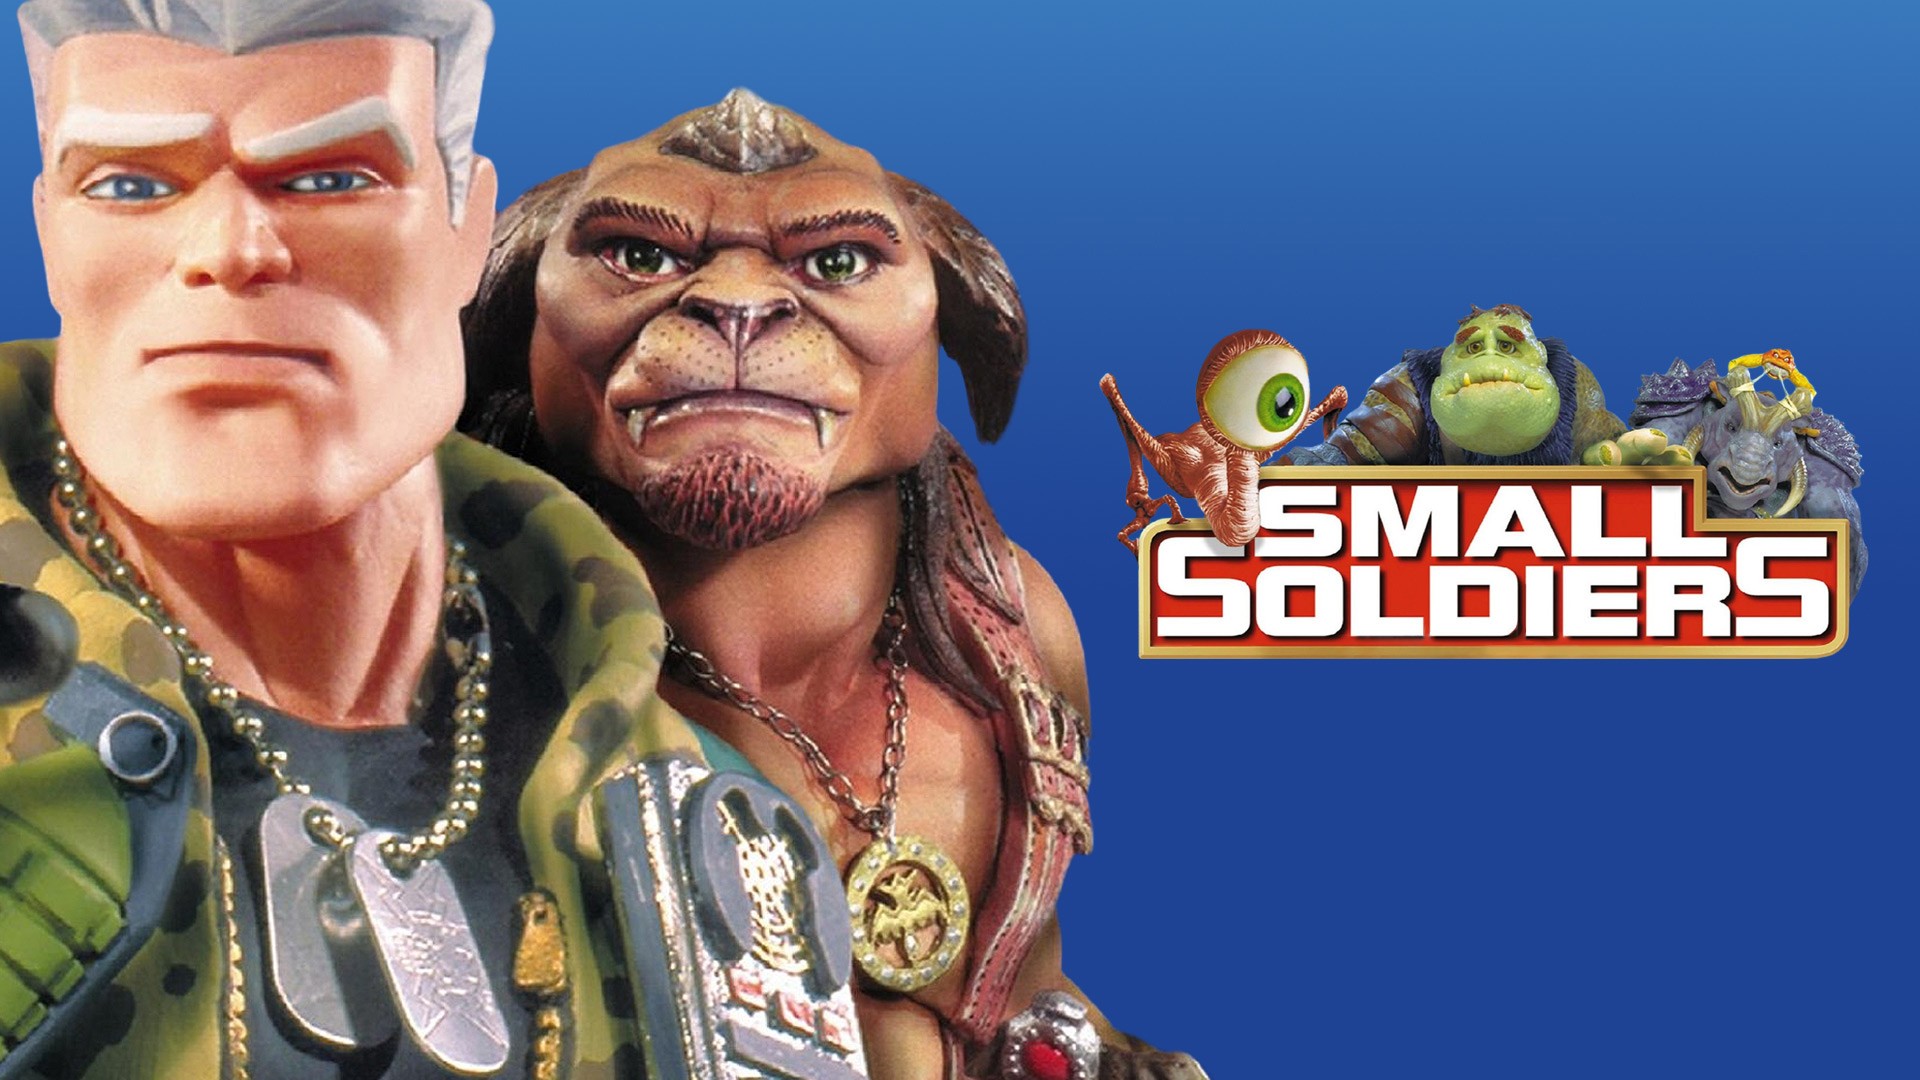 Small Soldiers HD Movies Wallpaper